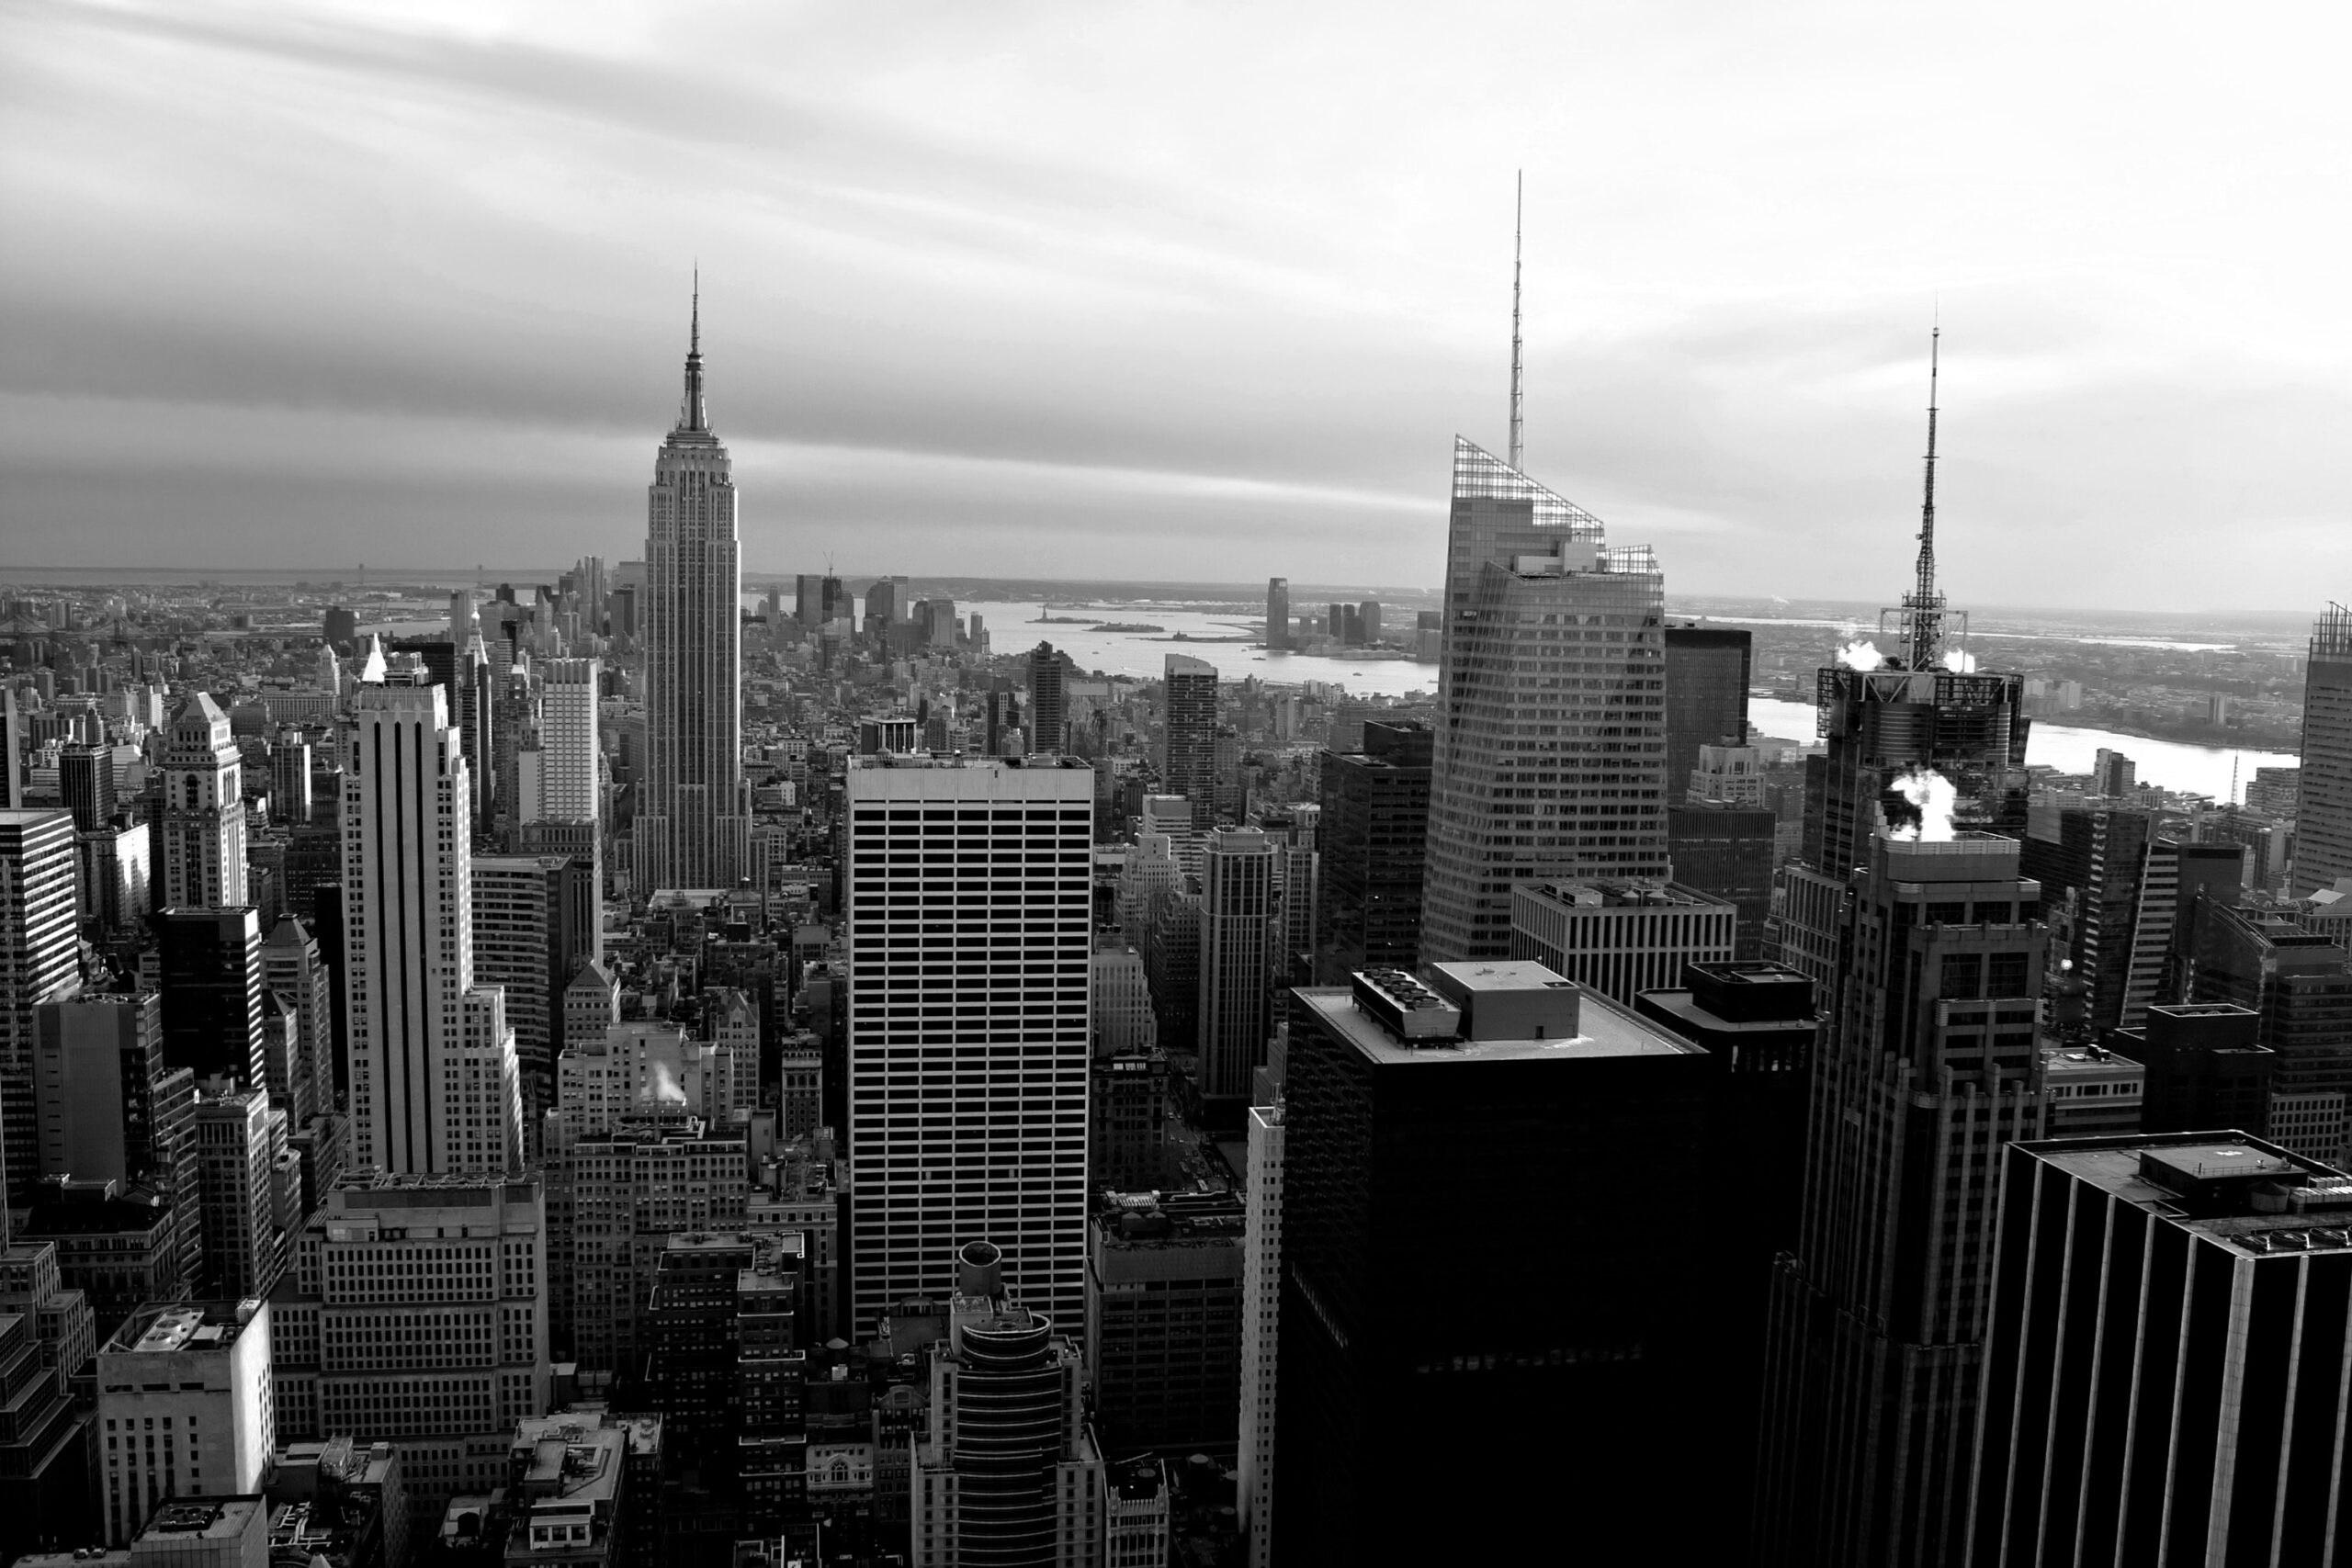 Free stock photos for commercial use. Horizontal aerial view of the Manhattan section of New York City including all of the buildings and skyline in black and white.